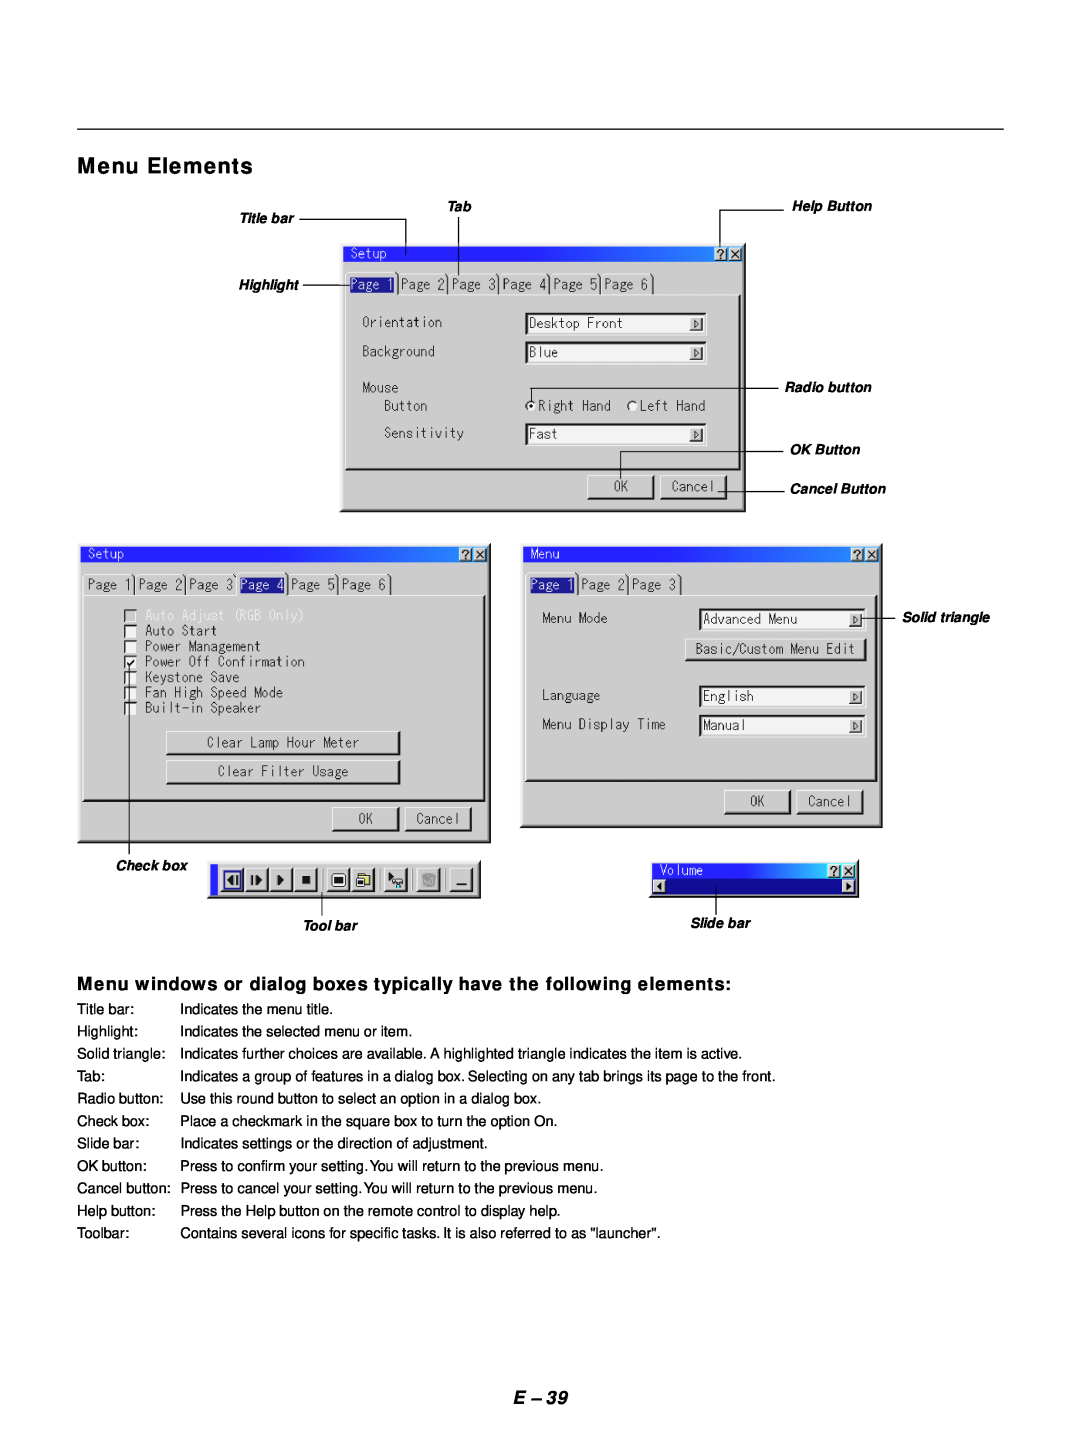 NEC GT1150 Menu Elements, Menu windows or dialog boxes typically have the following elements, Tab Title bar Highlight 